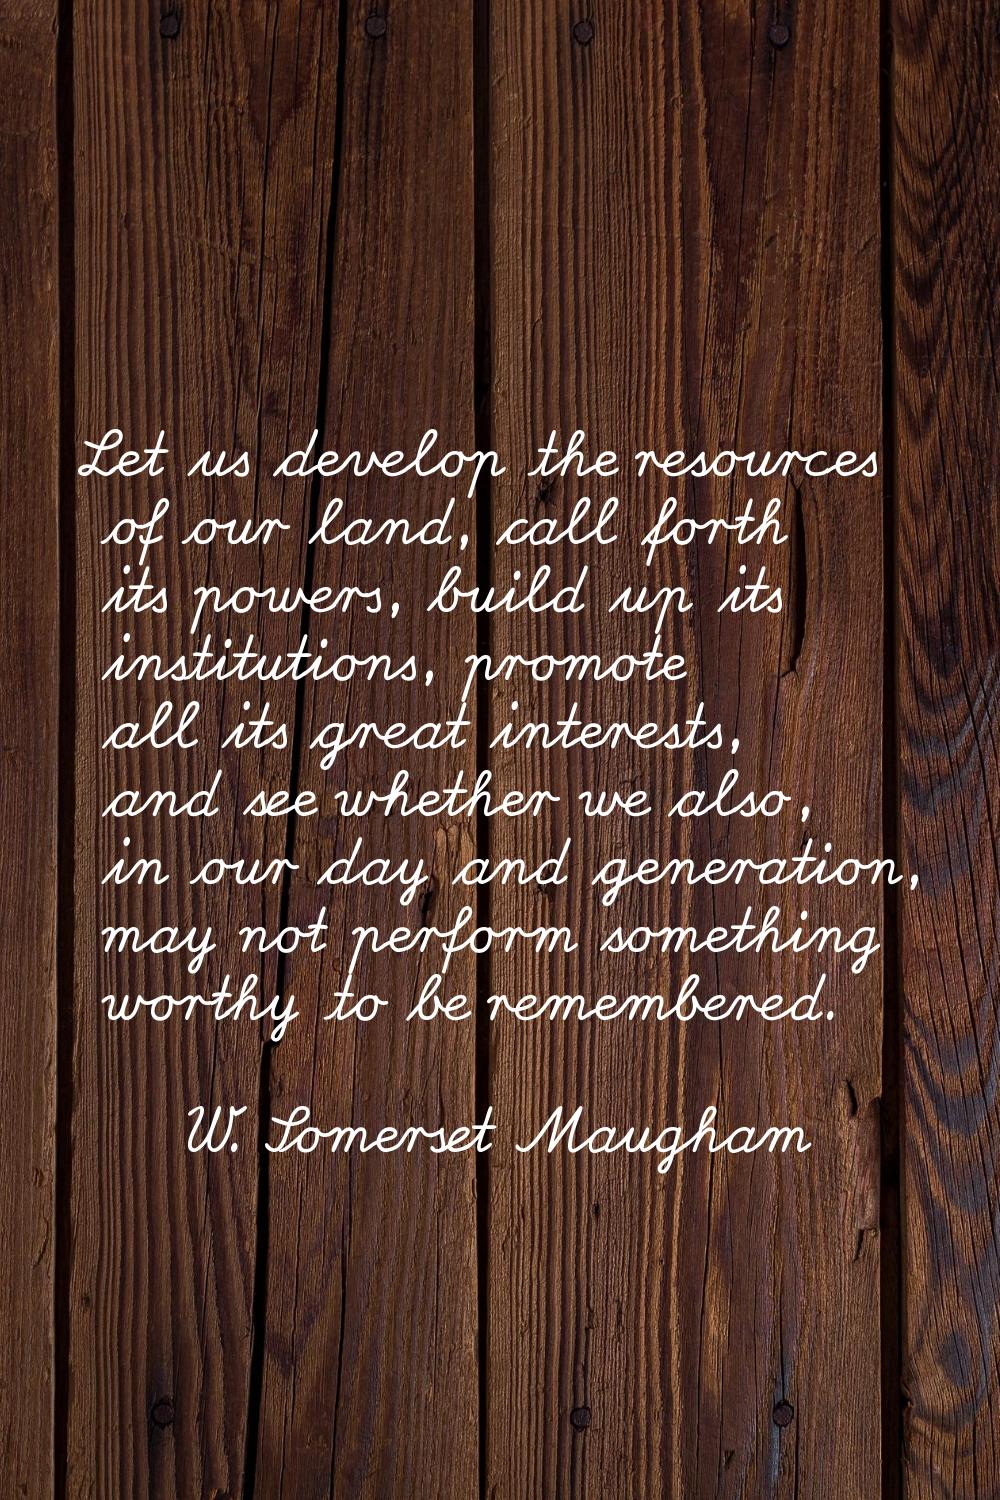 Let us develop the resources of our land, call forth its powers, build up its institutions, promote